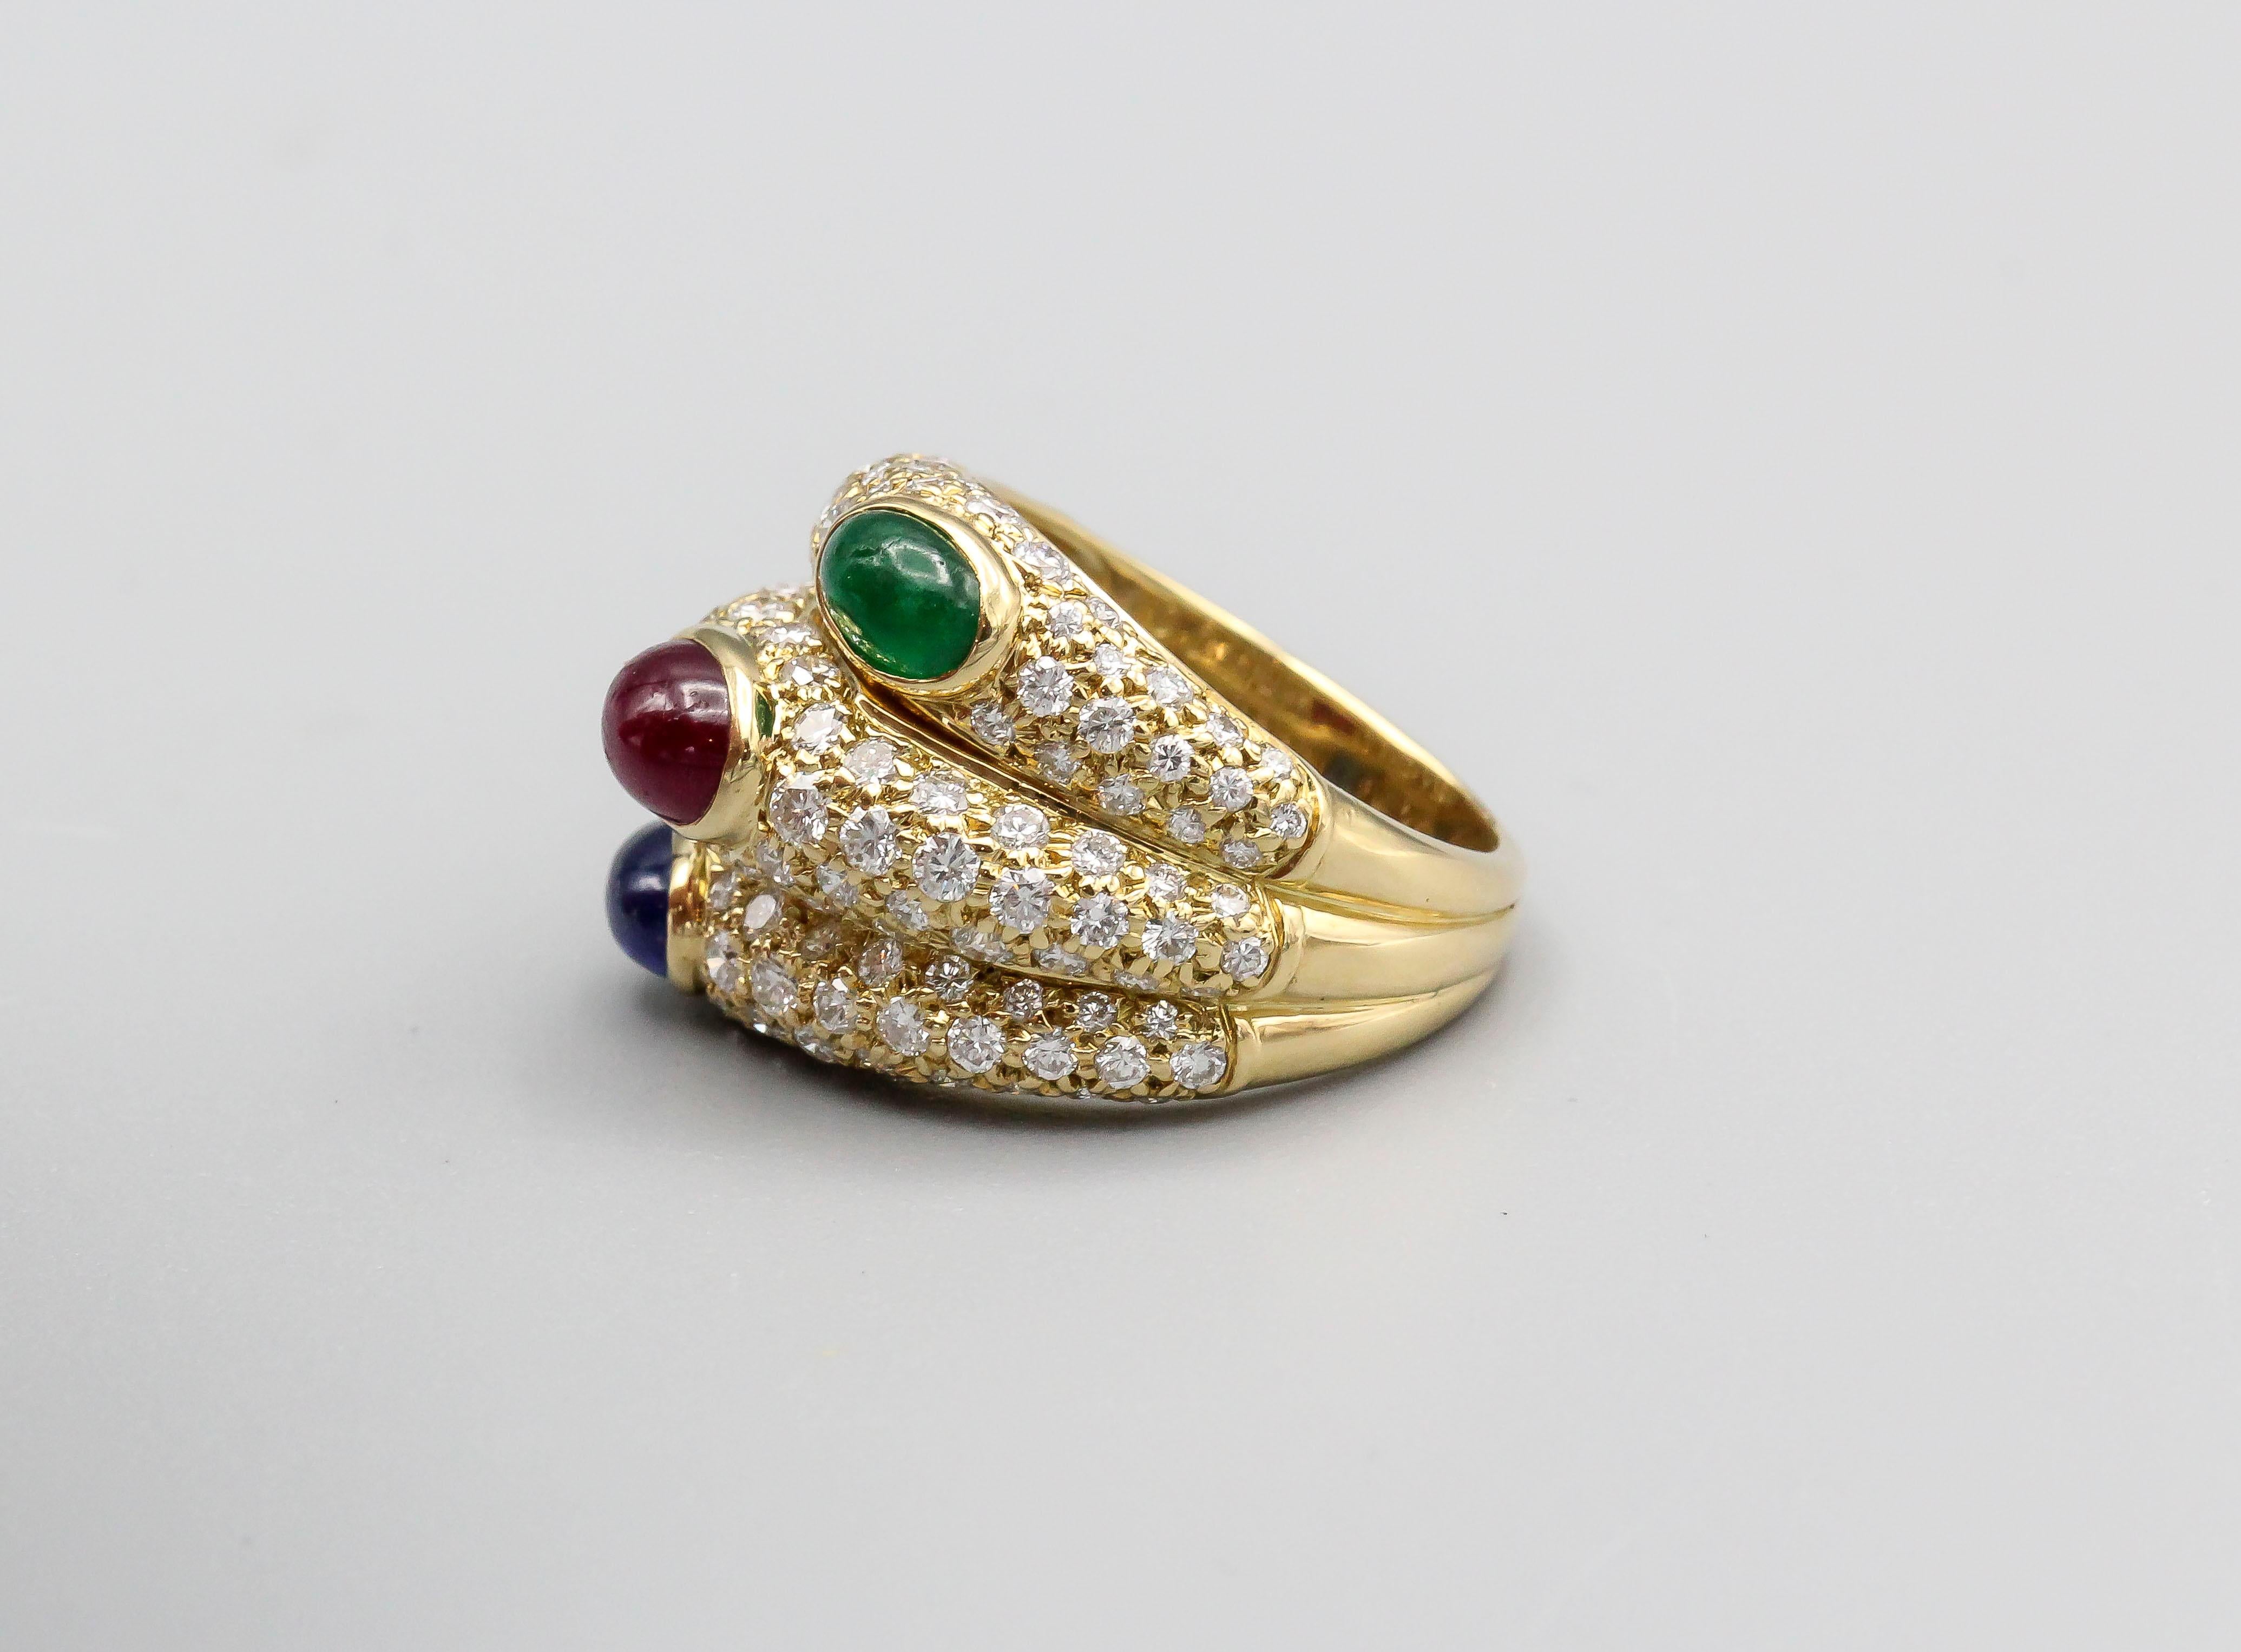 Fine 18k yellow gold ring with pave set diamonds and a combination of sapphire, ruby, and emerald cabochon stones, by Cartier. The design of the ring is made to look like three rings stacked on top of one another with each colored stone cabochon